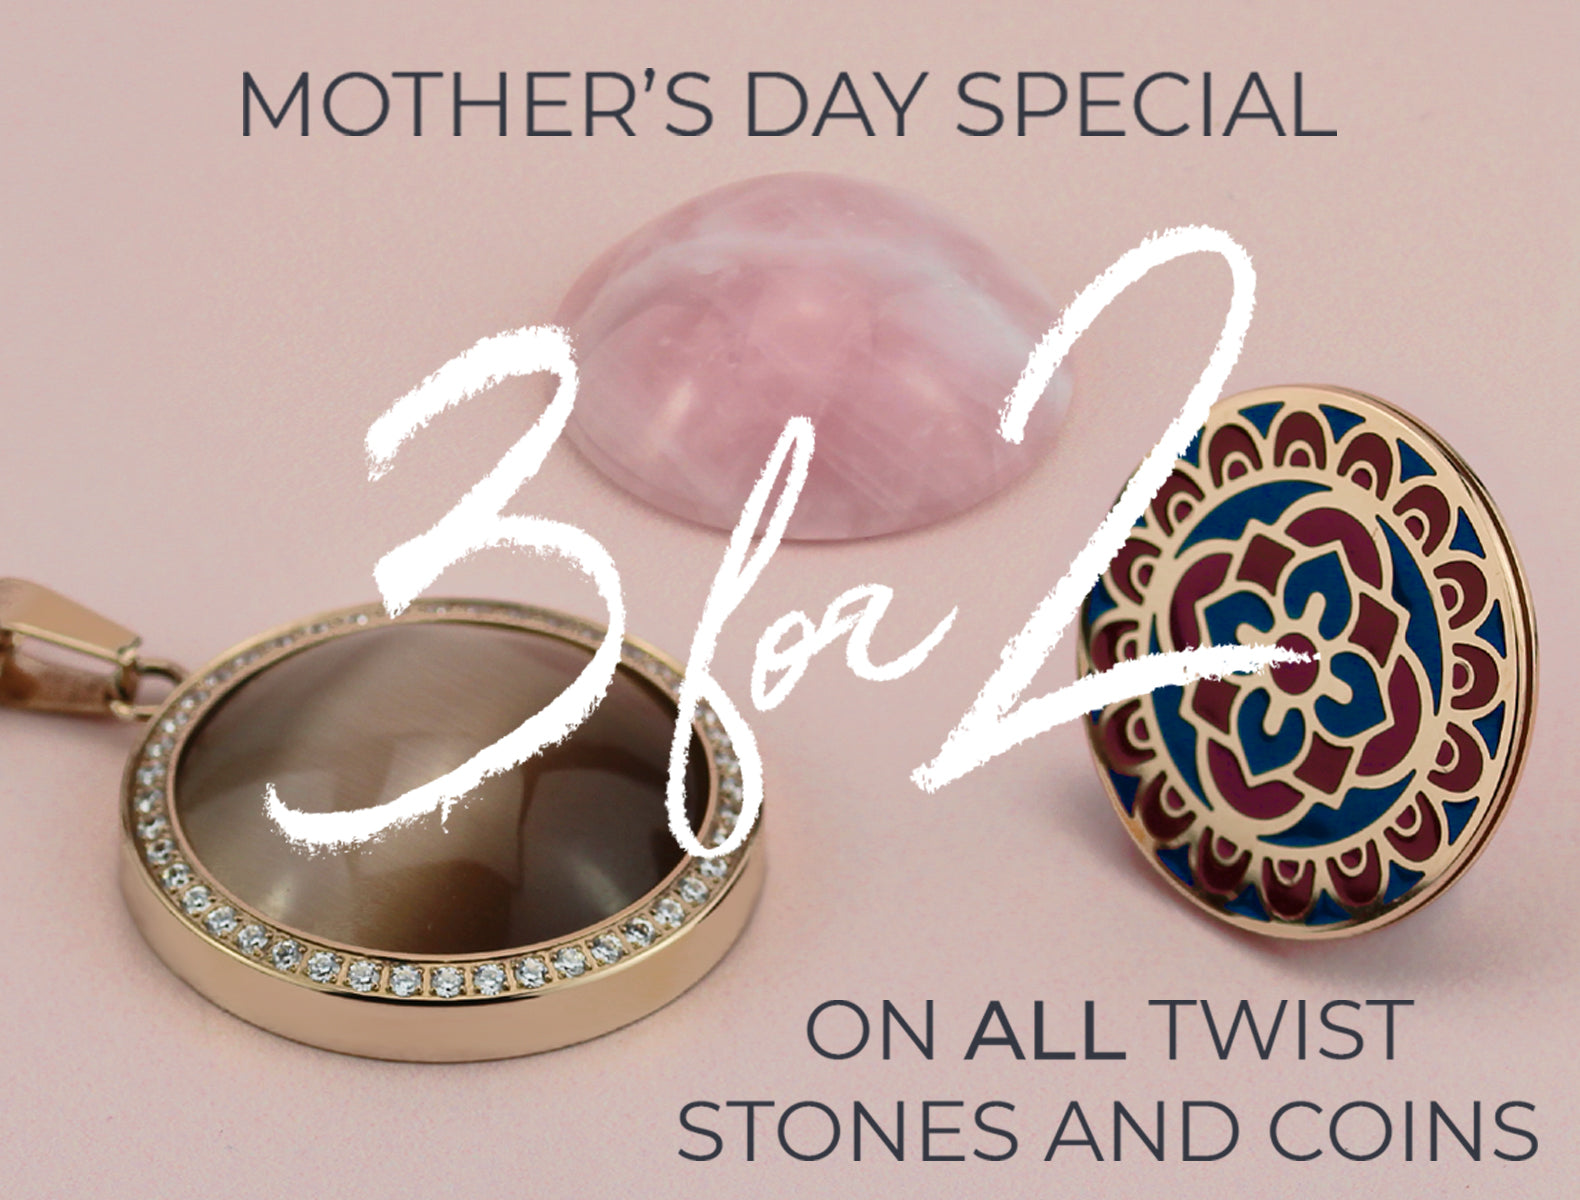 MOTHER'S DAY SPECIAL - 3 FOR 2 ON ALL TWIST STONES & COINS